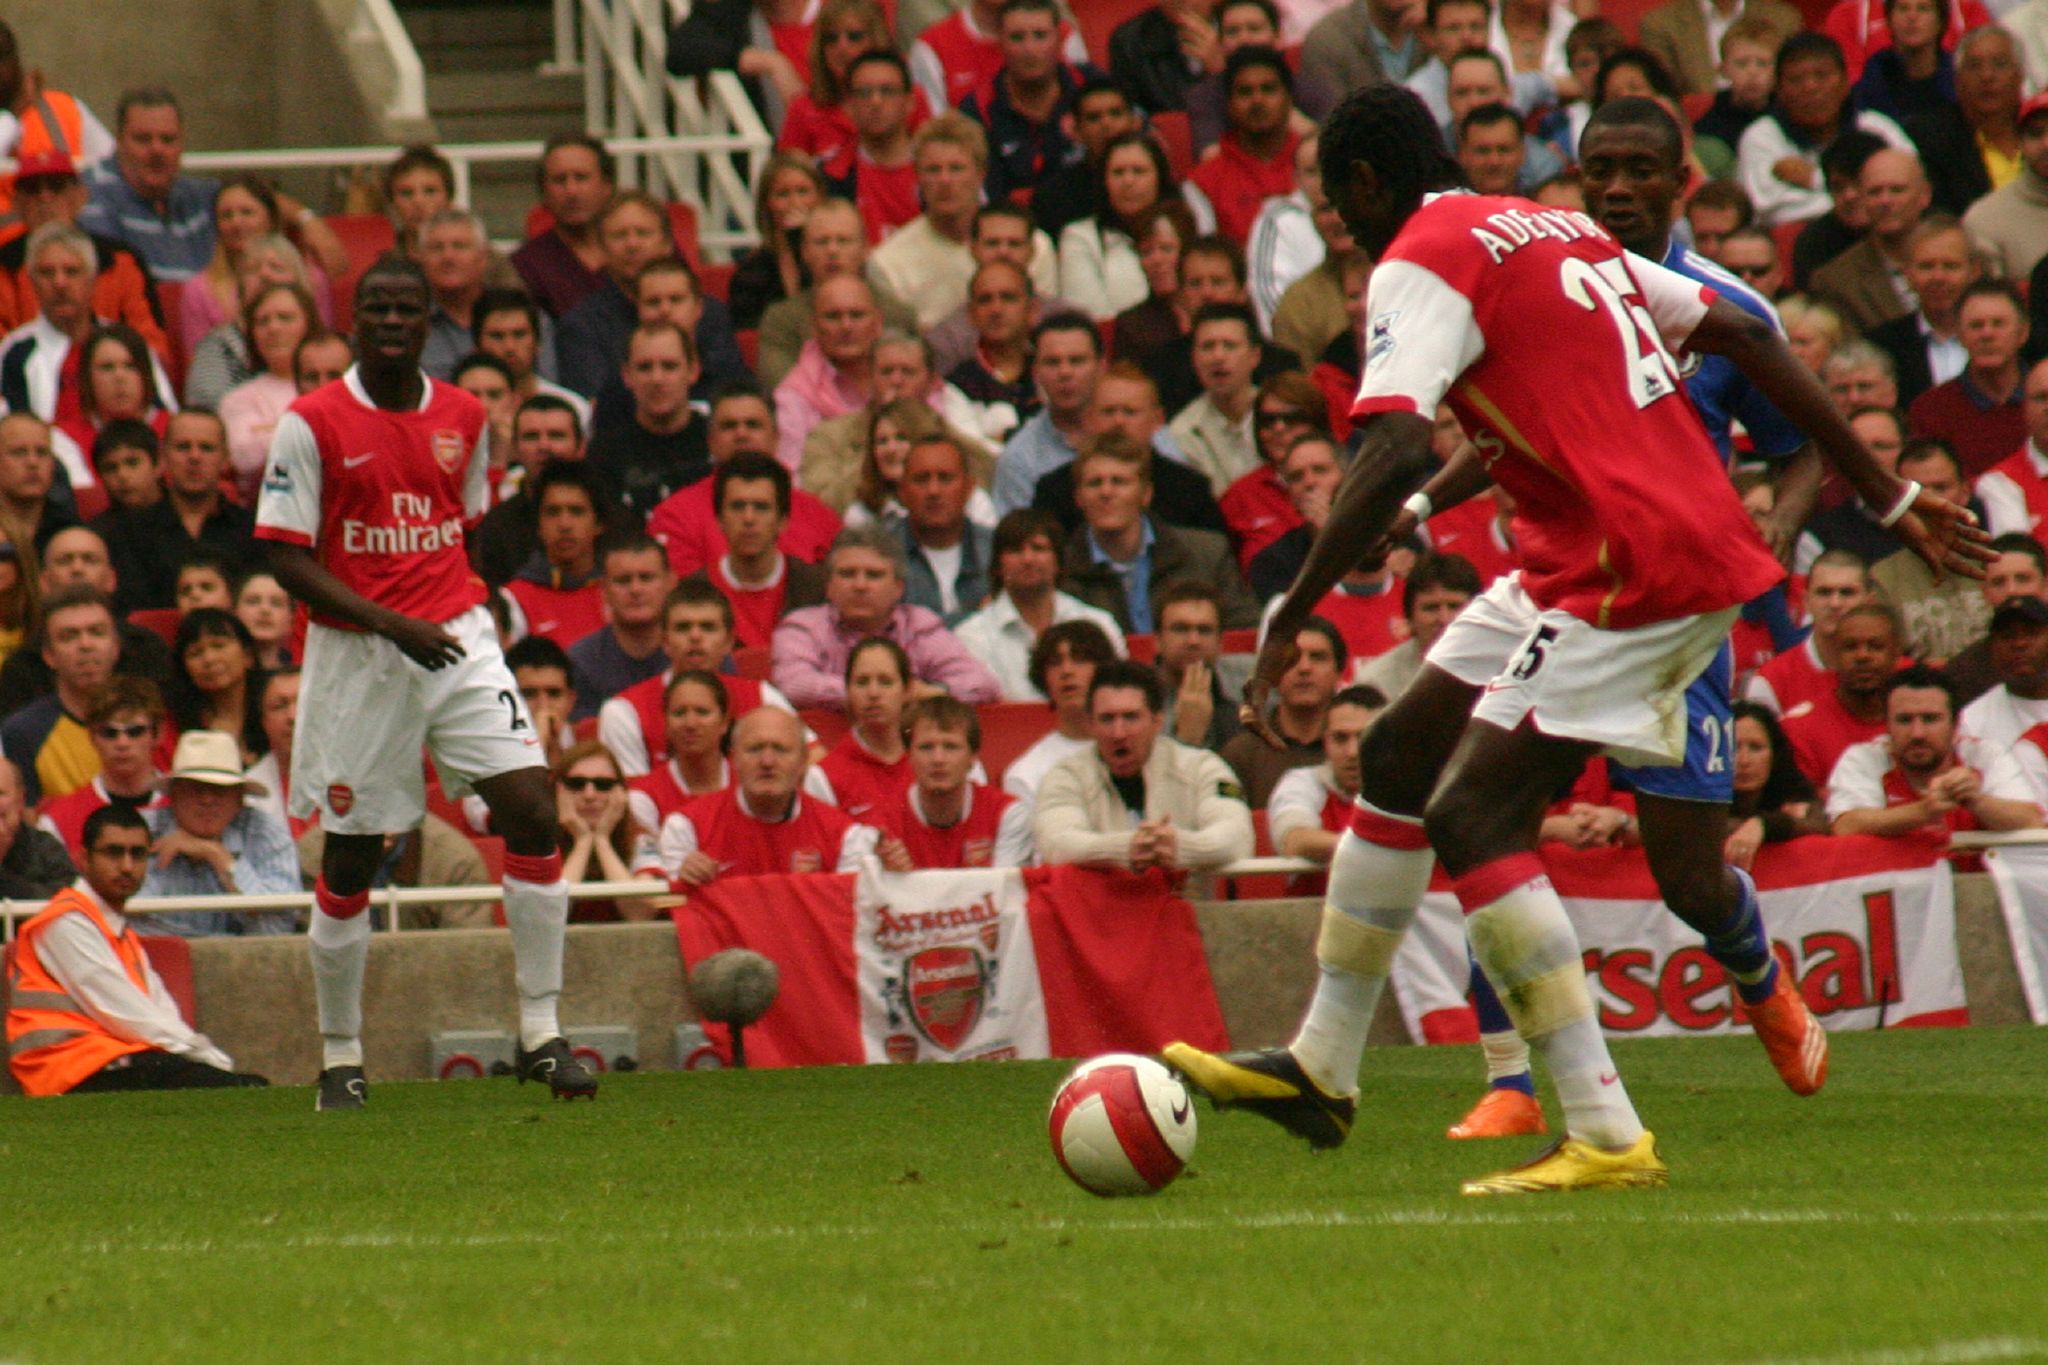 two soccer players fighting for the ball in front of spectators